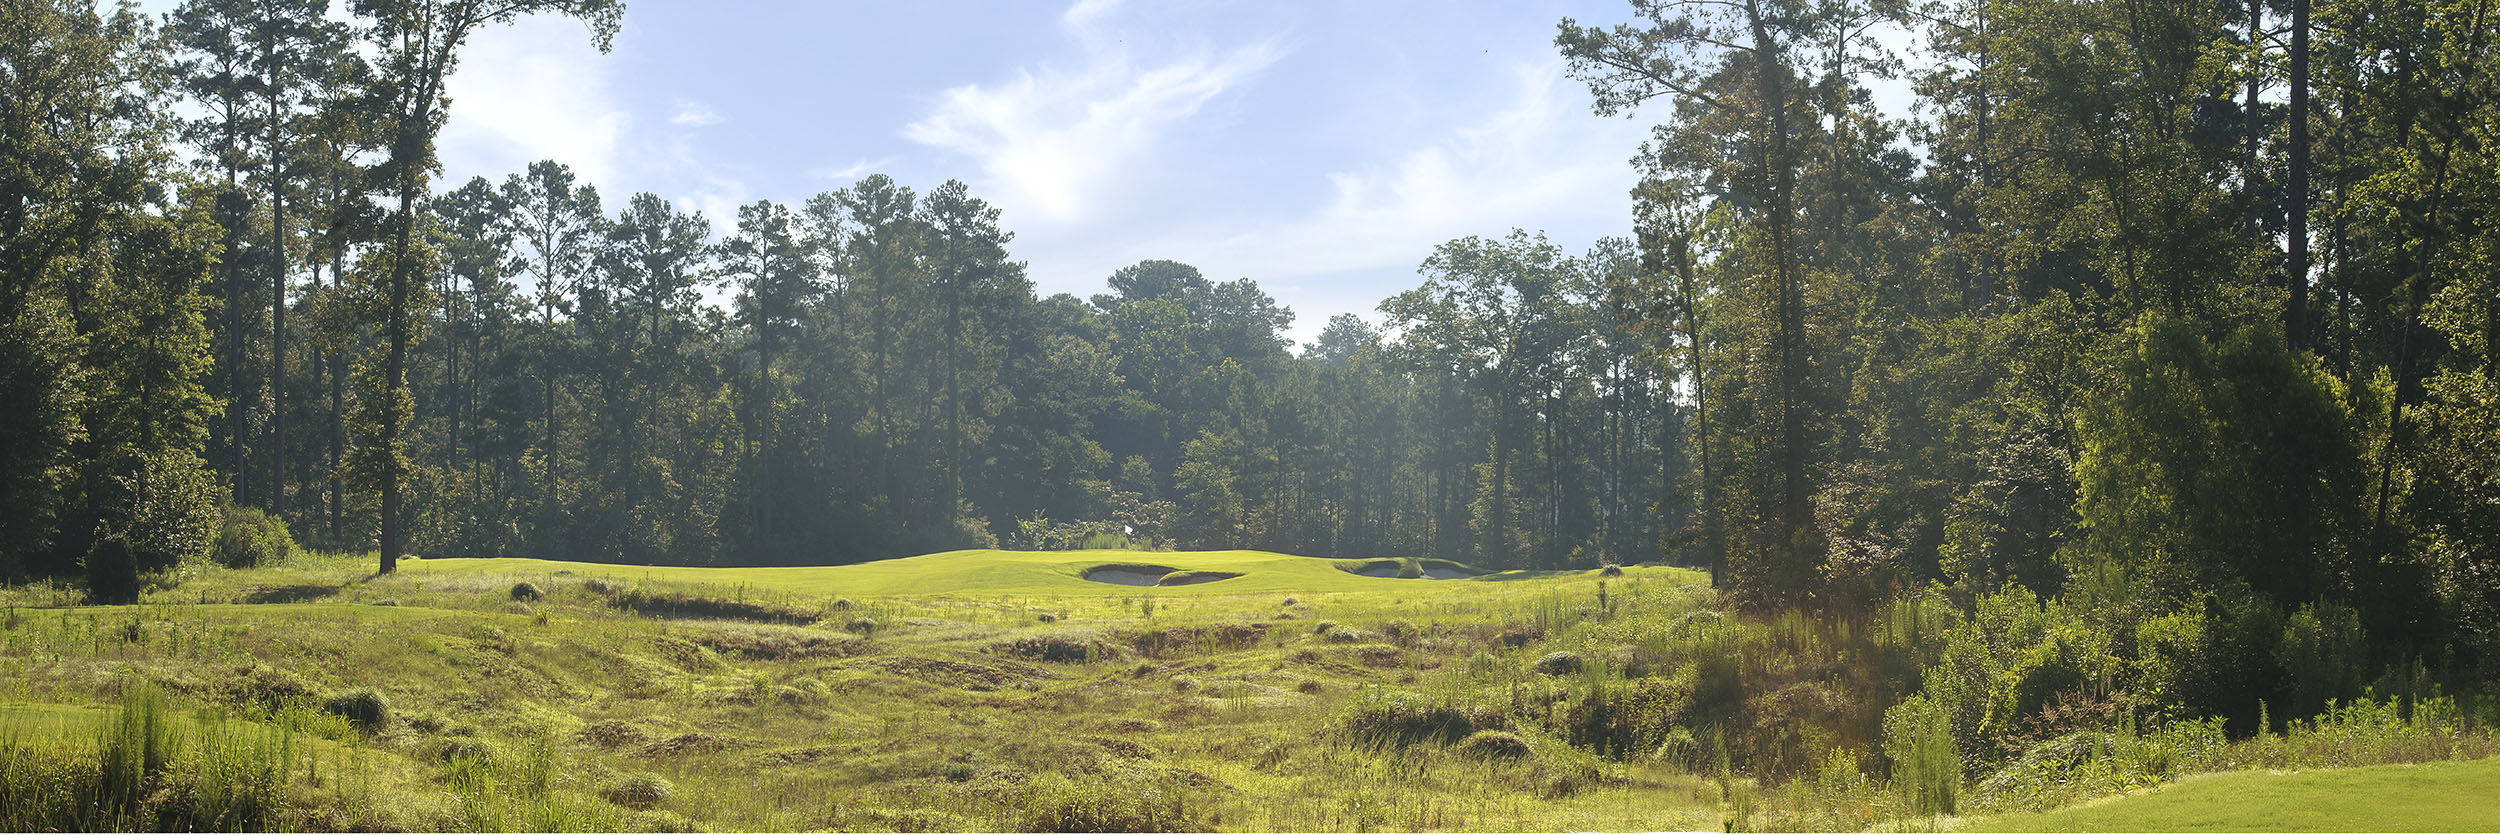 Whispering Pines Needler Course No 6